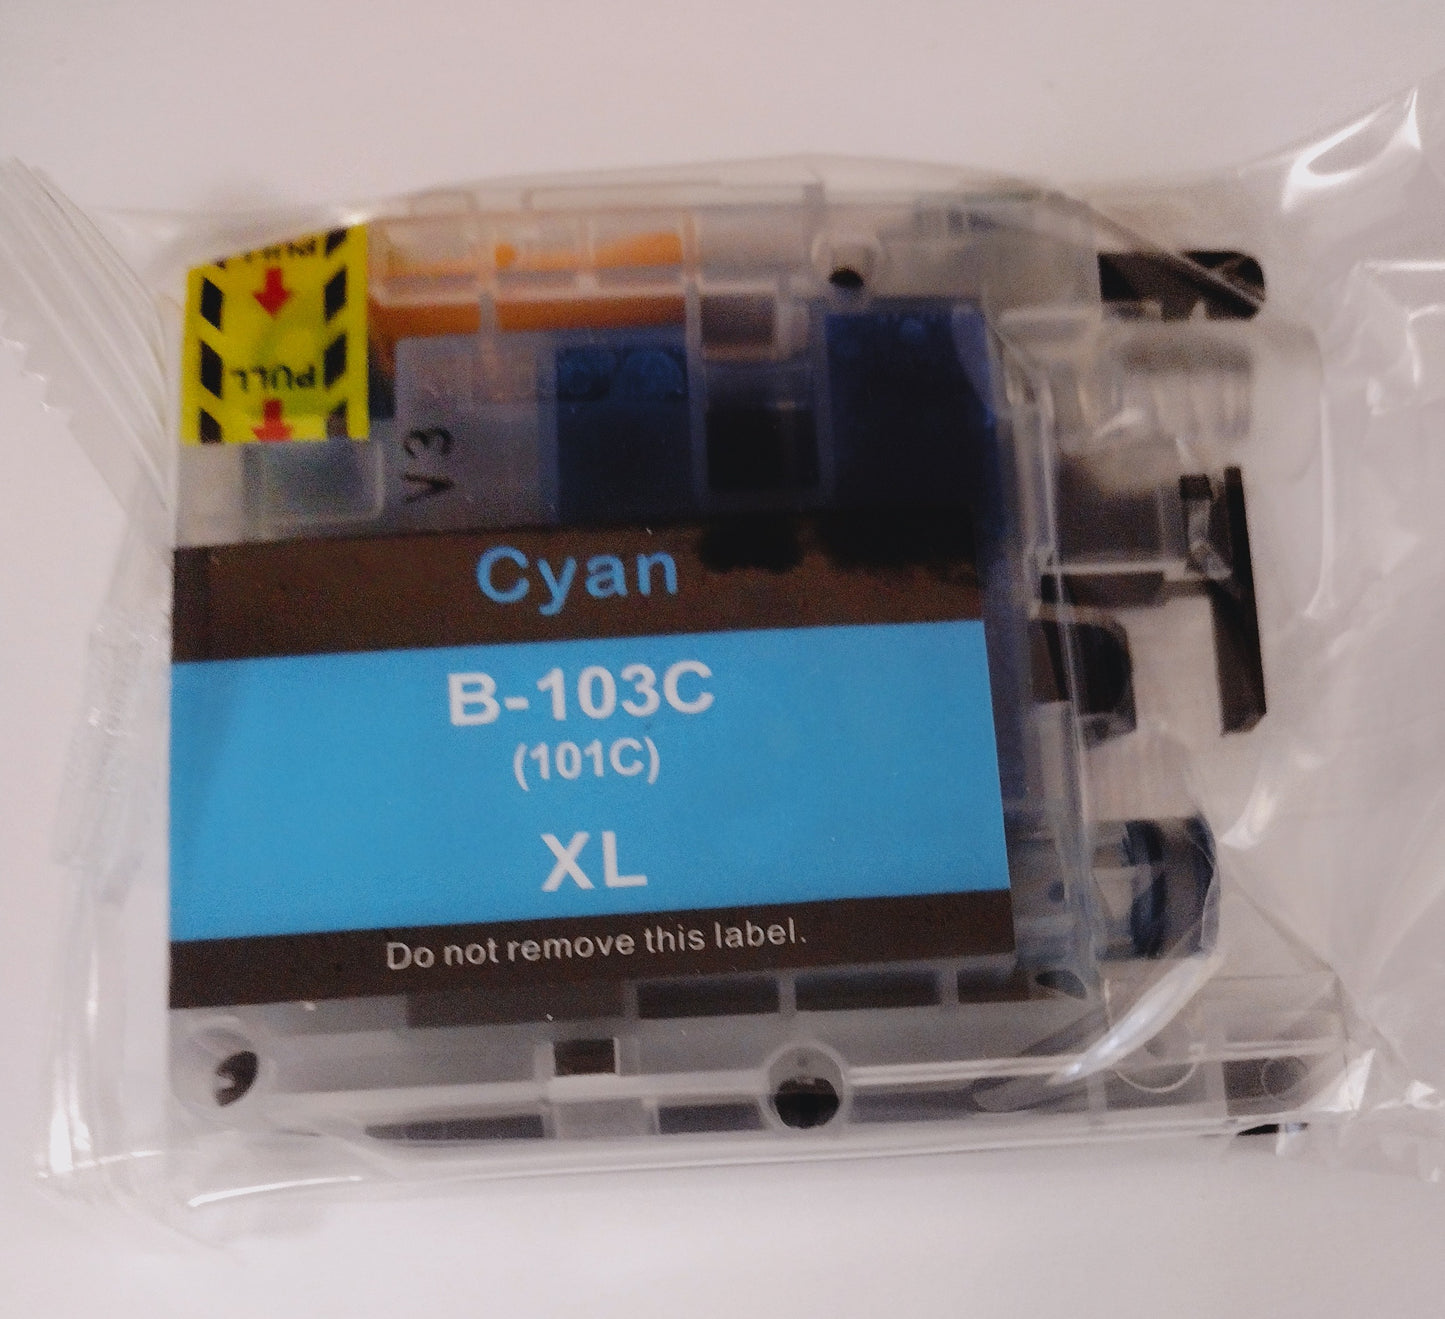 CMY Image Compatible Brother Ink Jet Printer Ink B103(101) XL